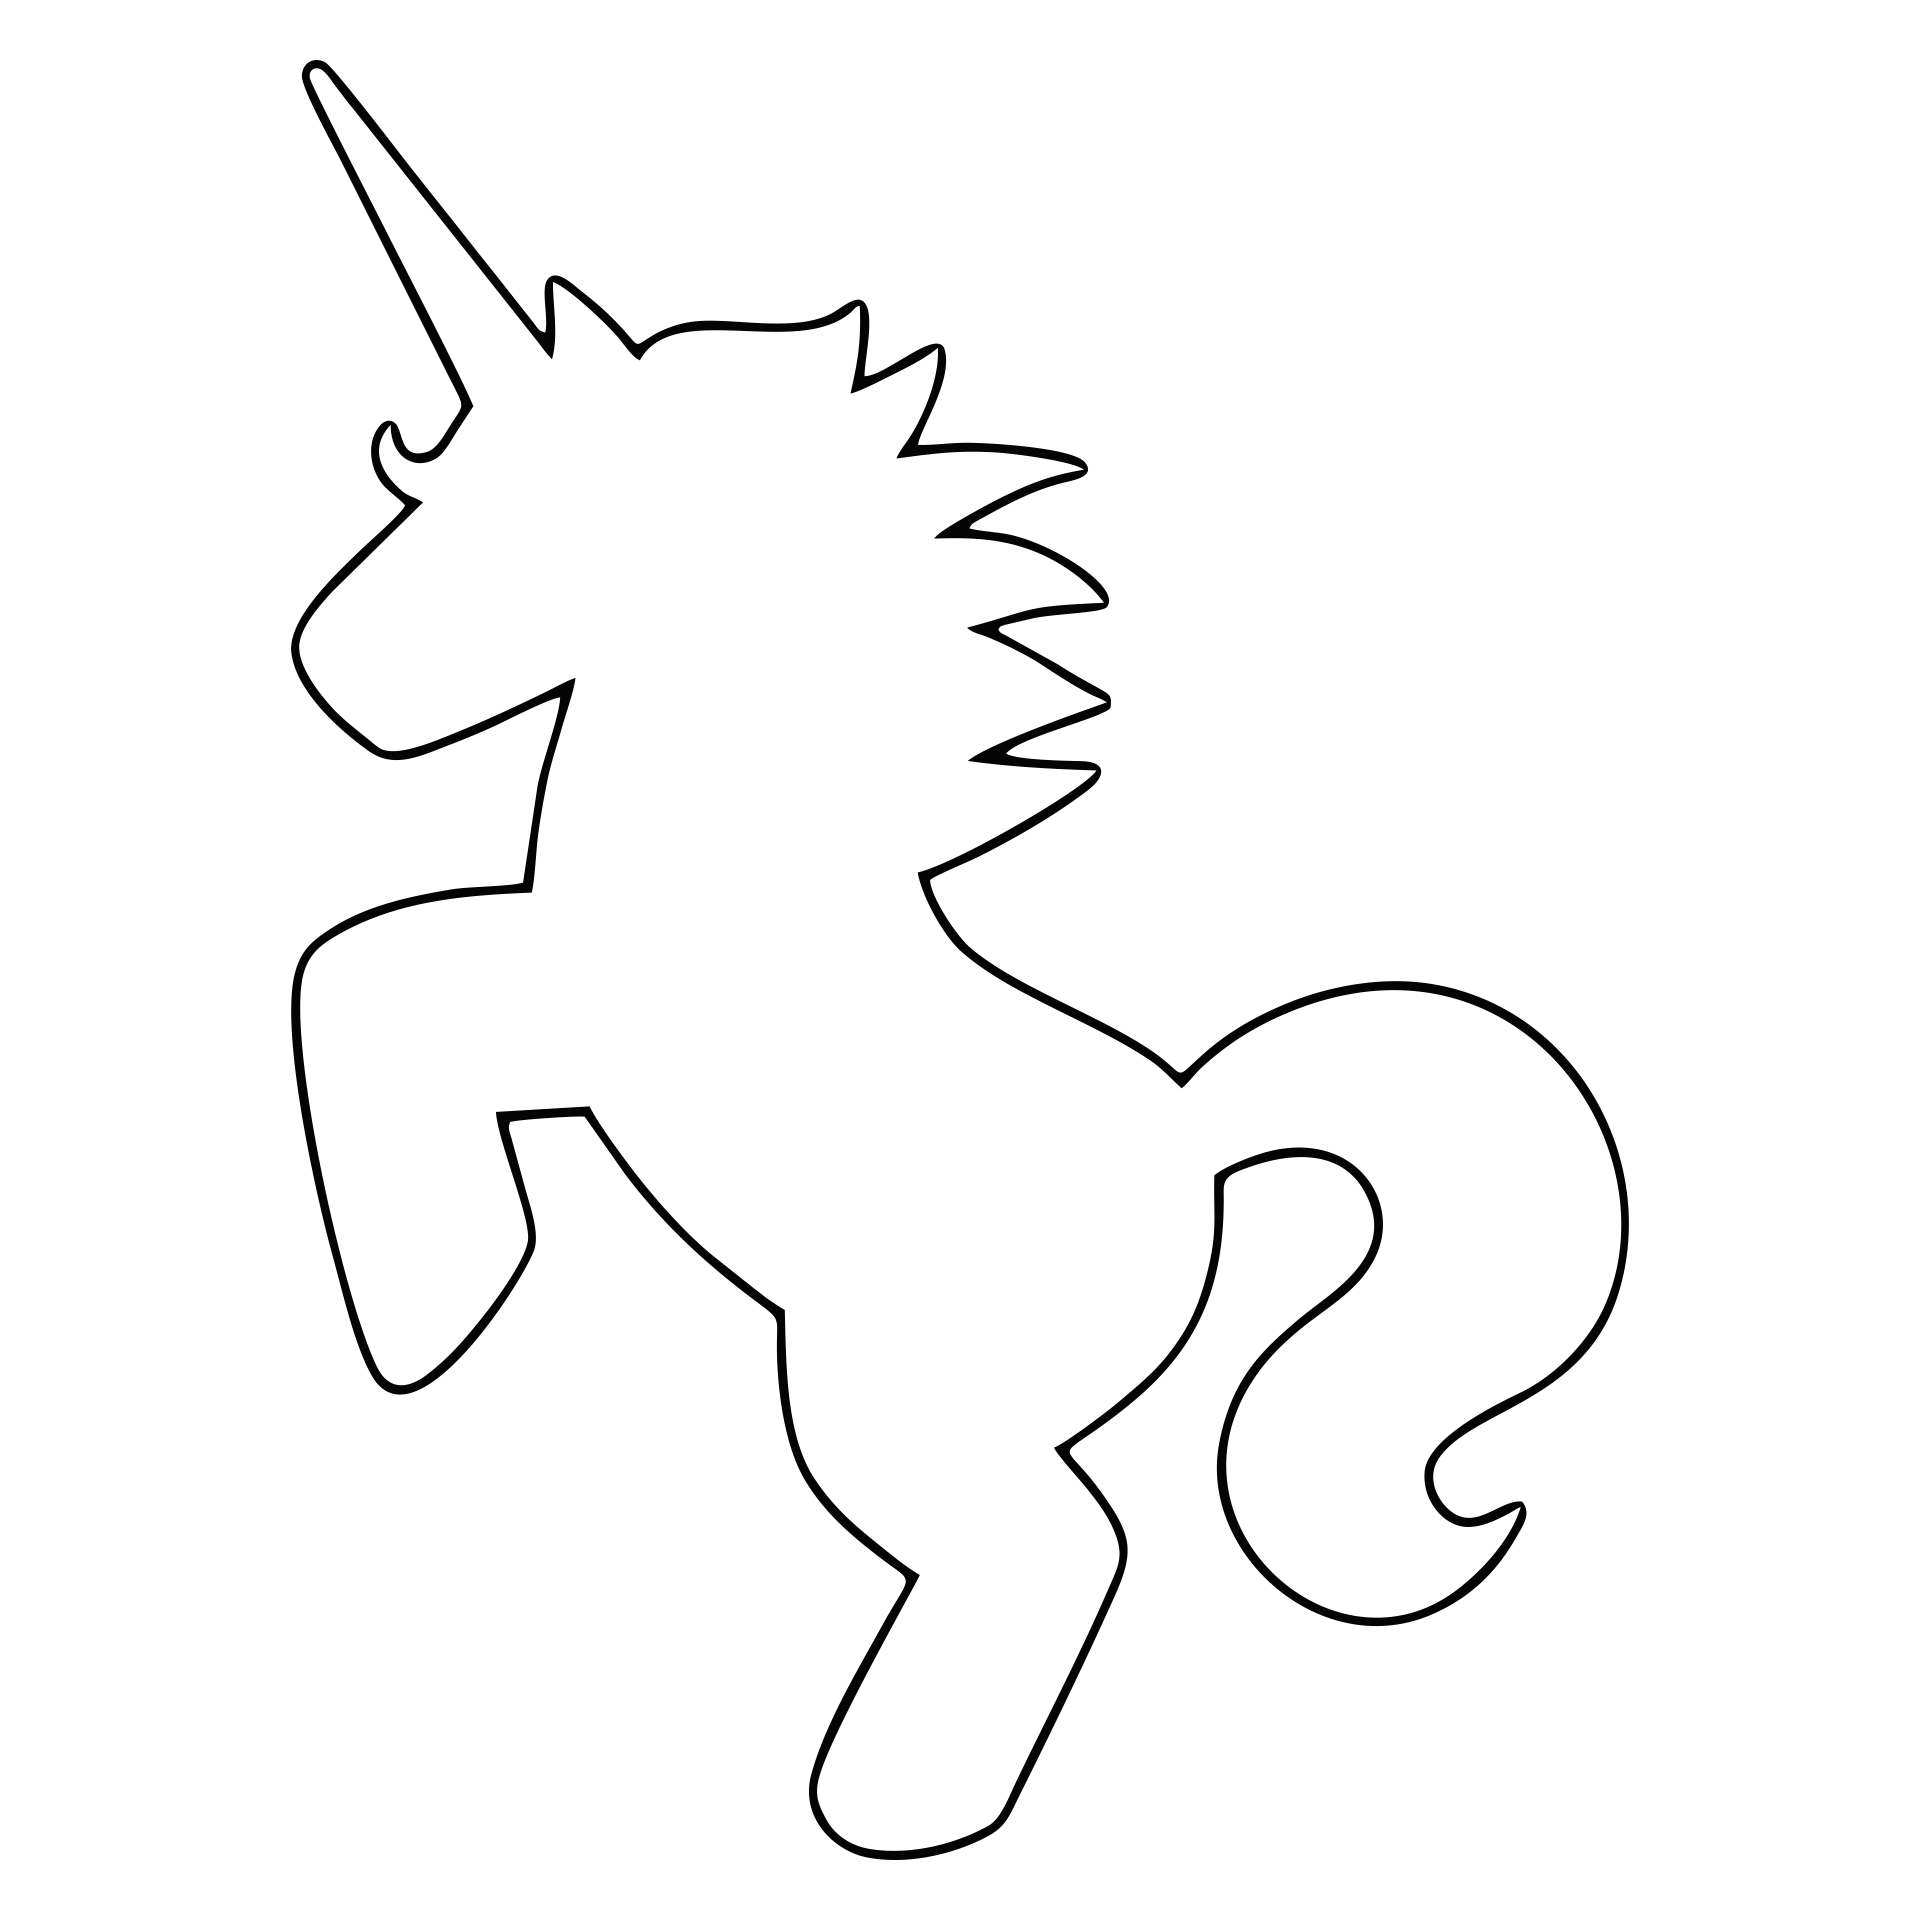 5 Best Images of Unicorn Stencils Free Printable Free Printable